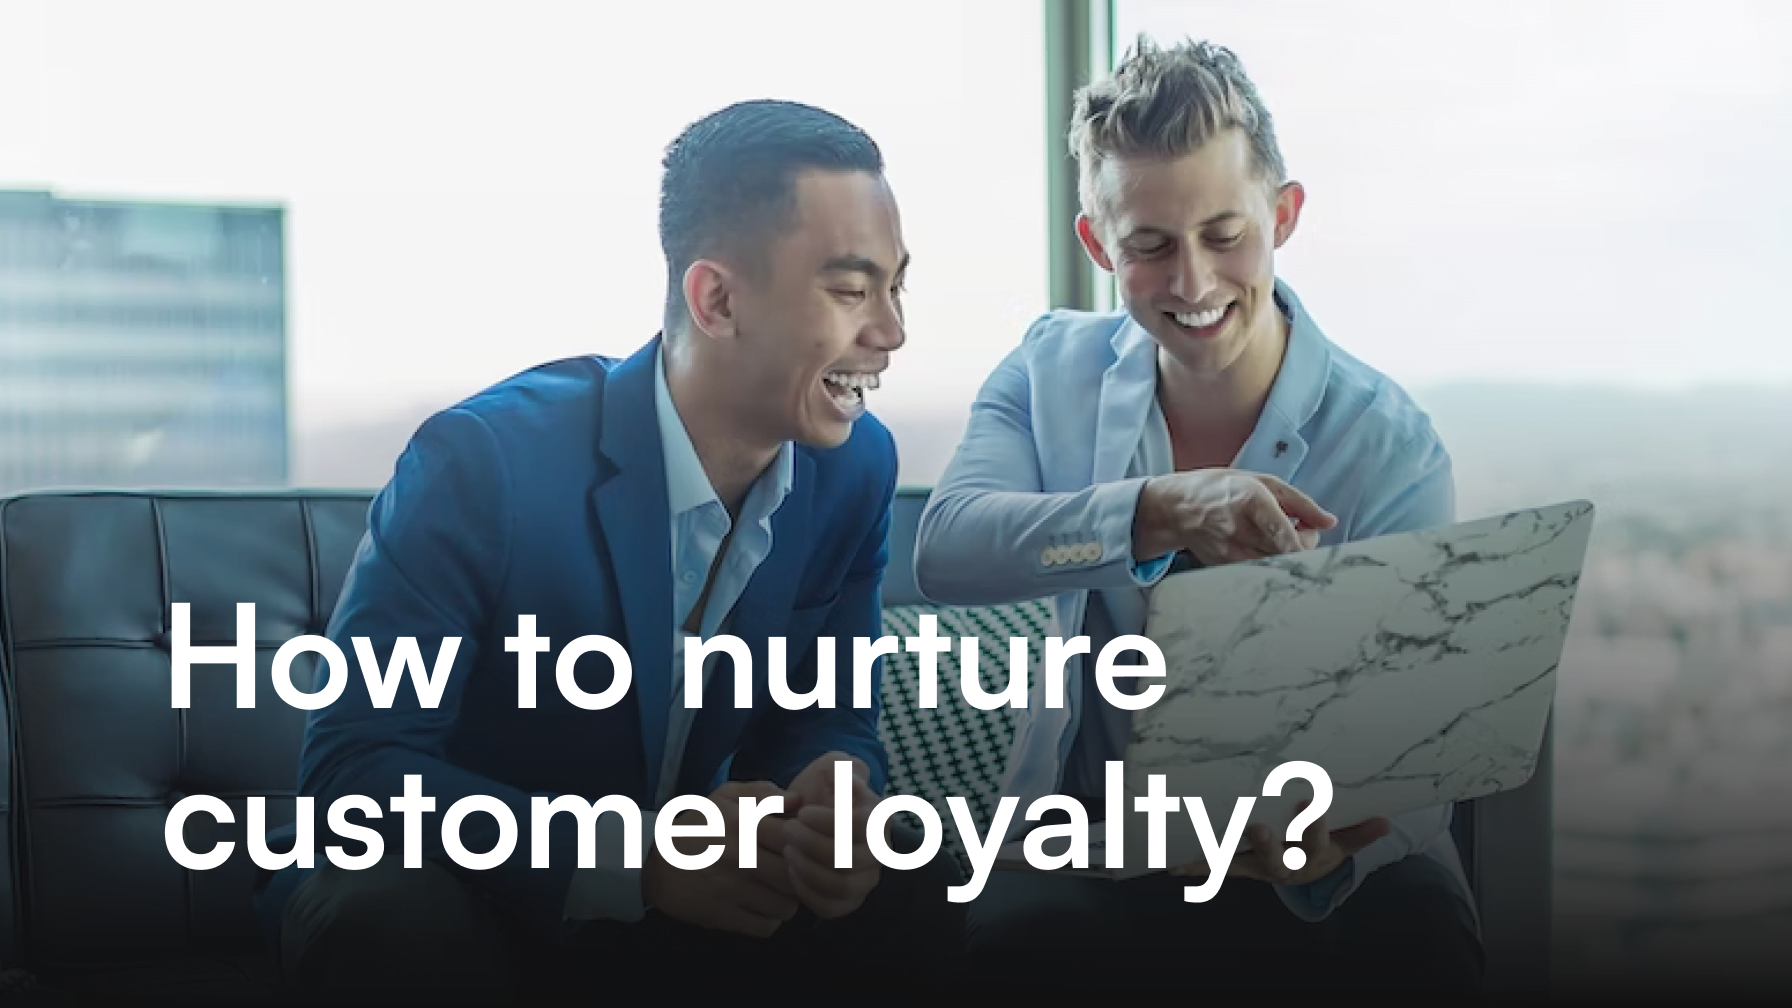 How to nurture customer loyalty to drive revenue growth?